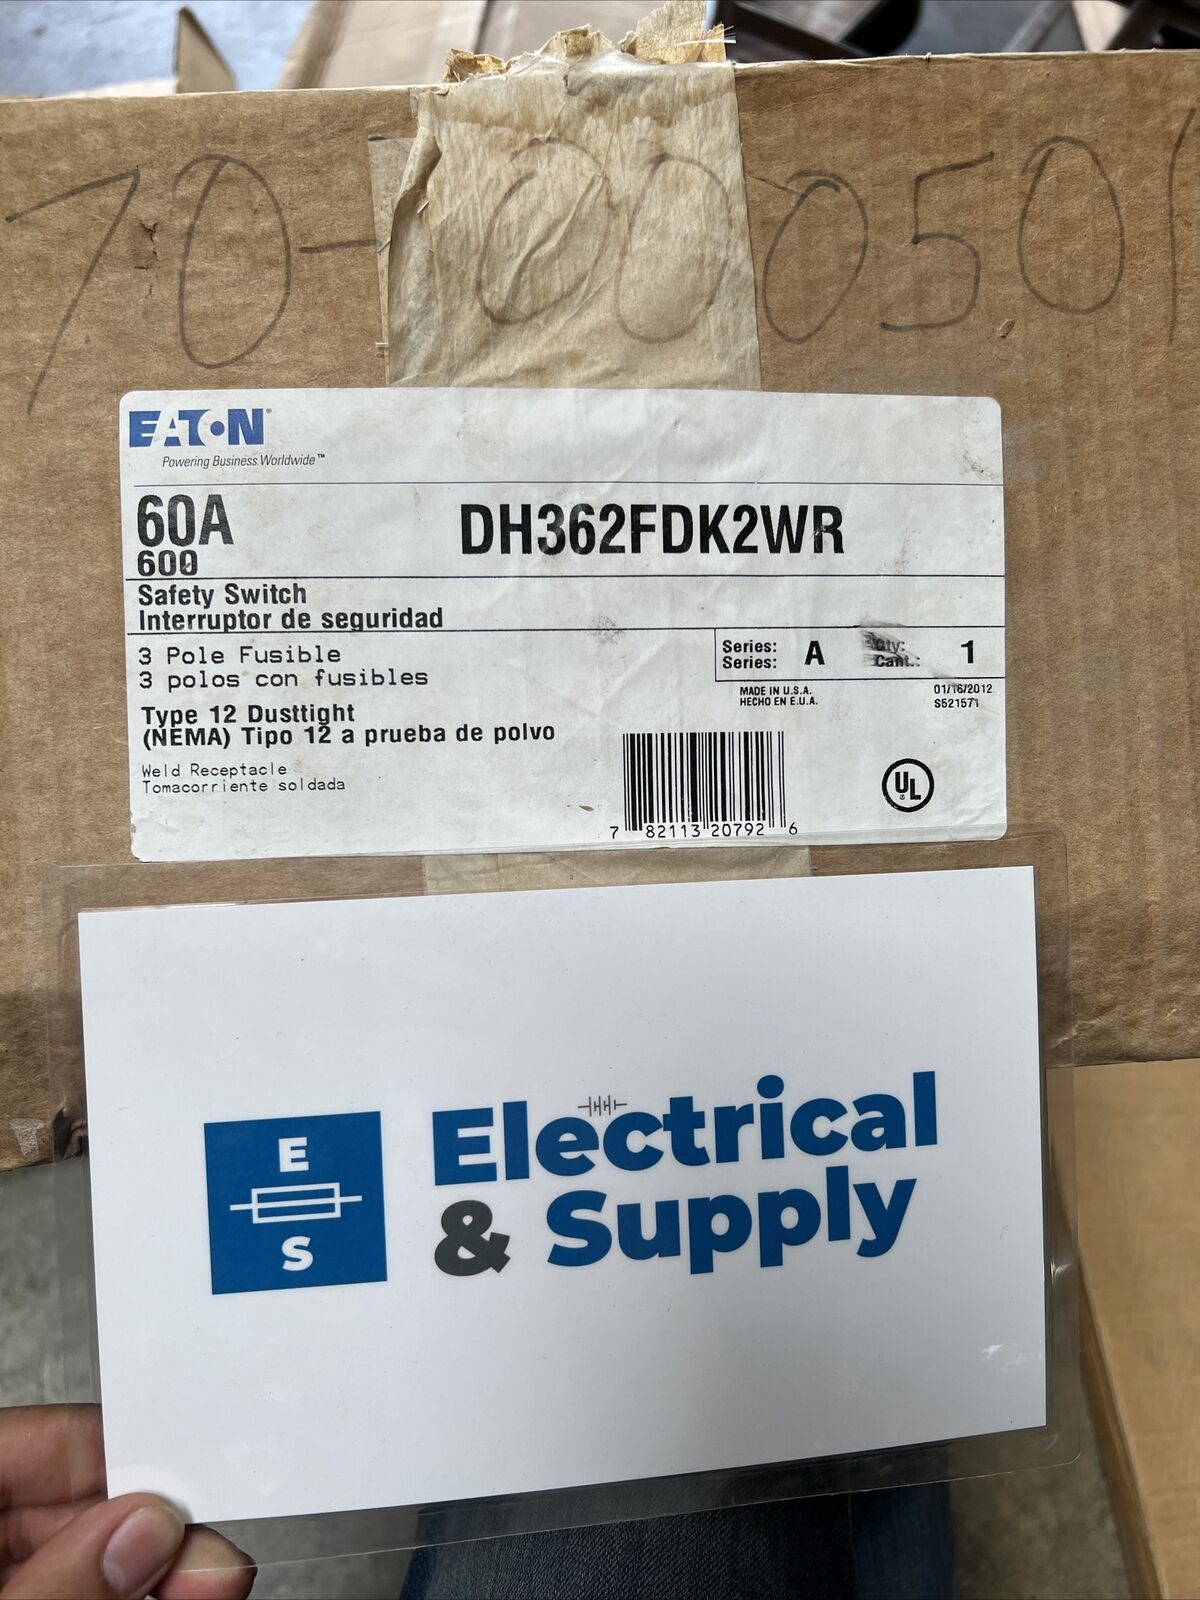 New CUTLER-HAMMER 60A HEAVY DUTY SAFETY SWITCH DH362FDK2WR TYPE 12